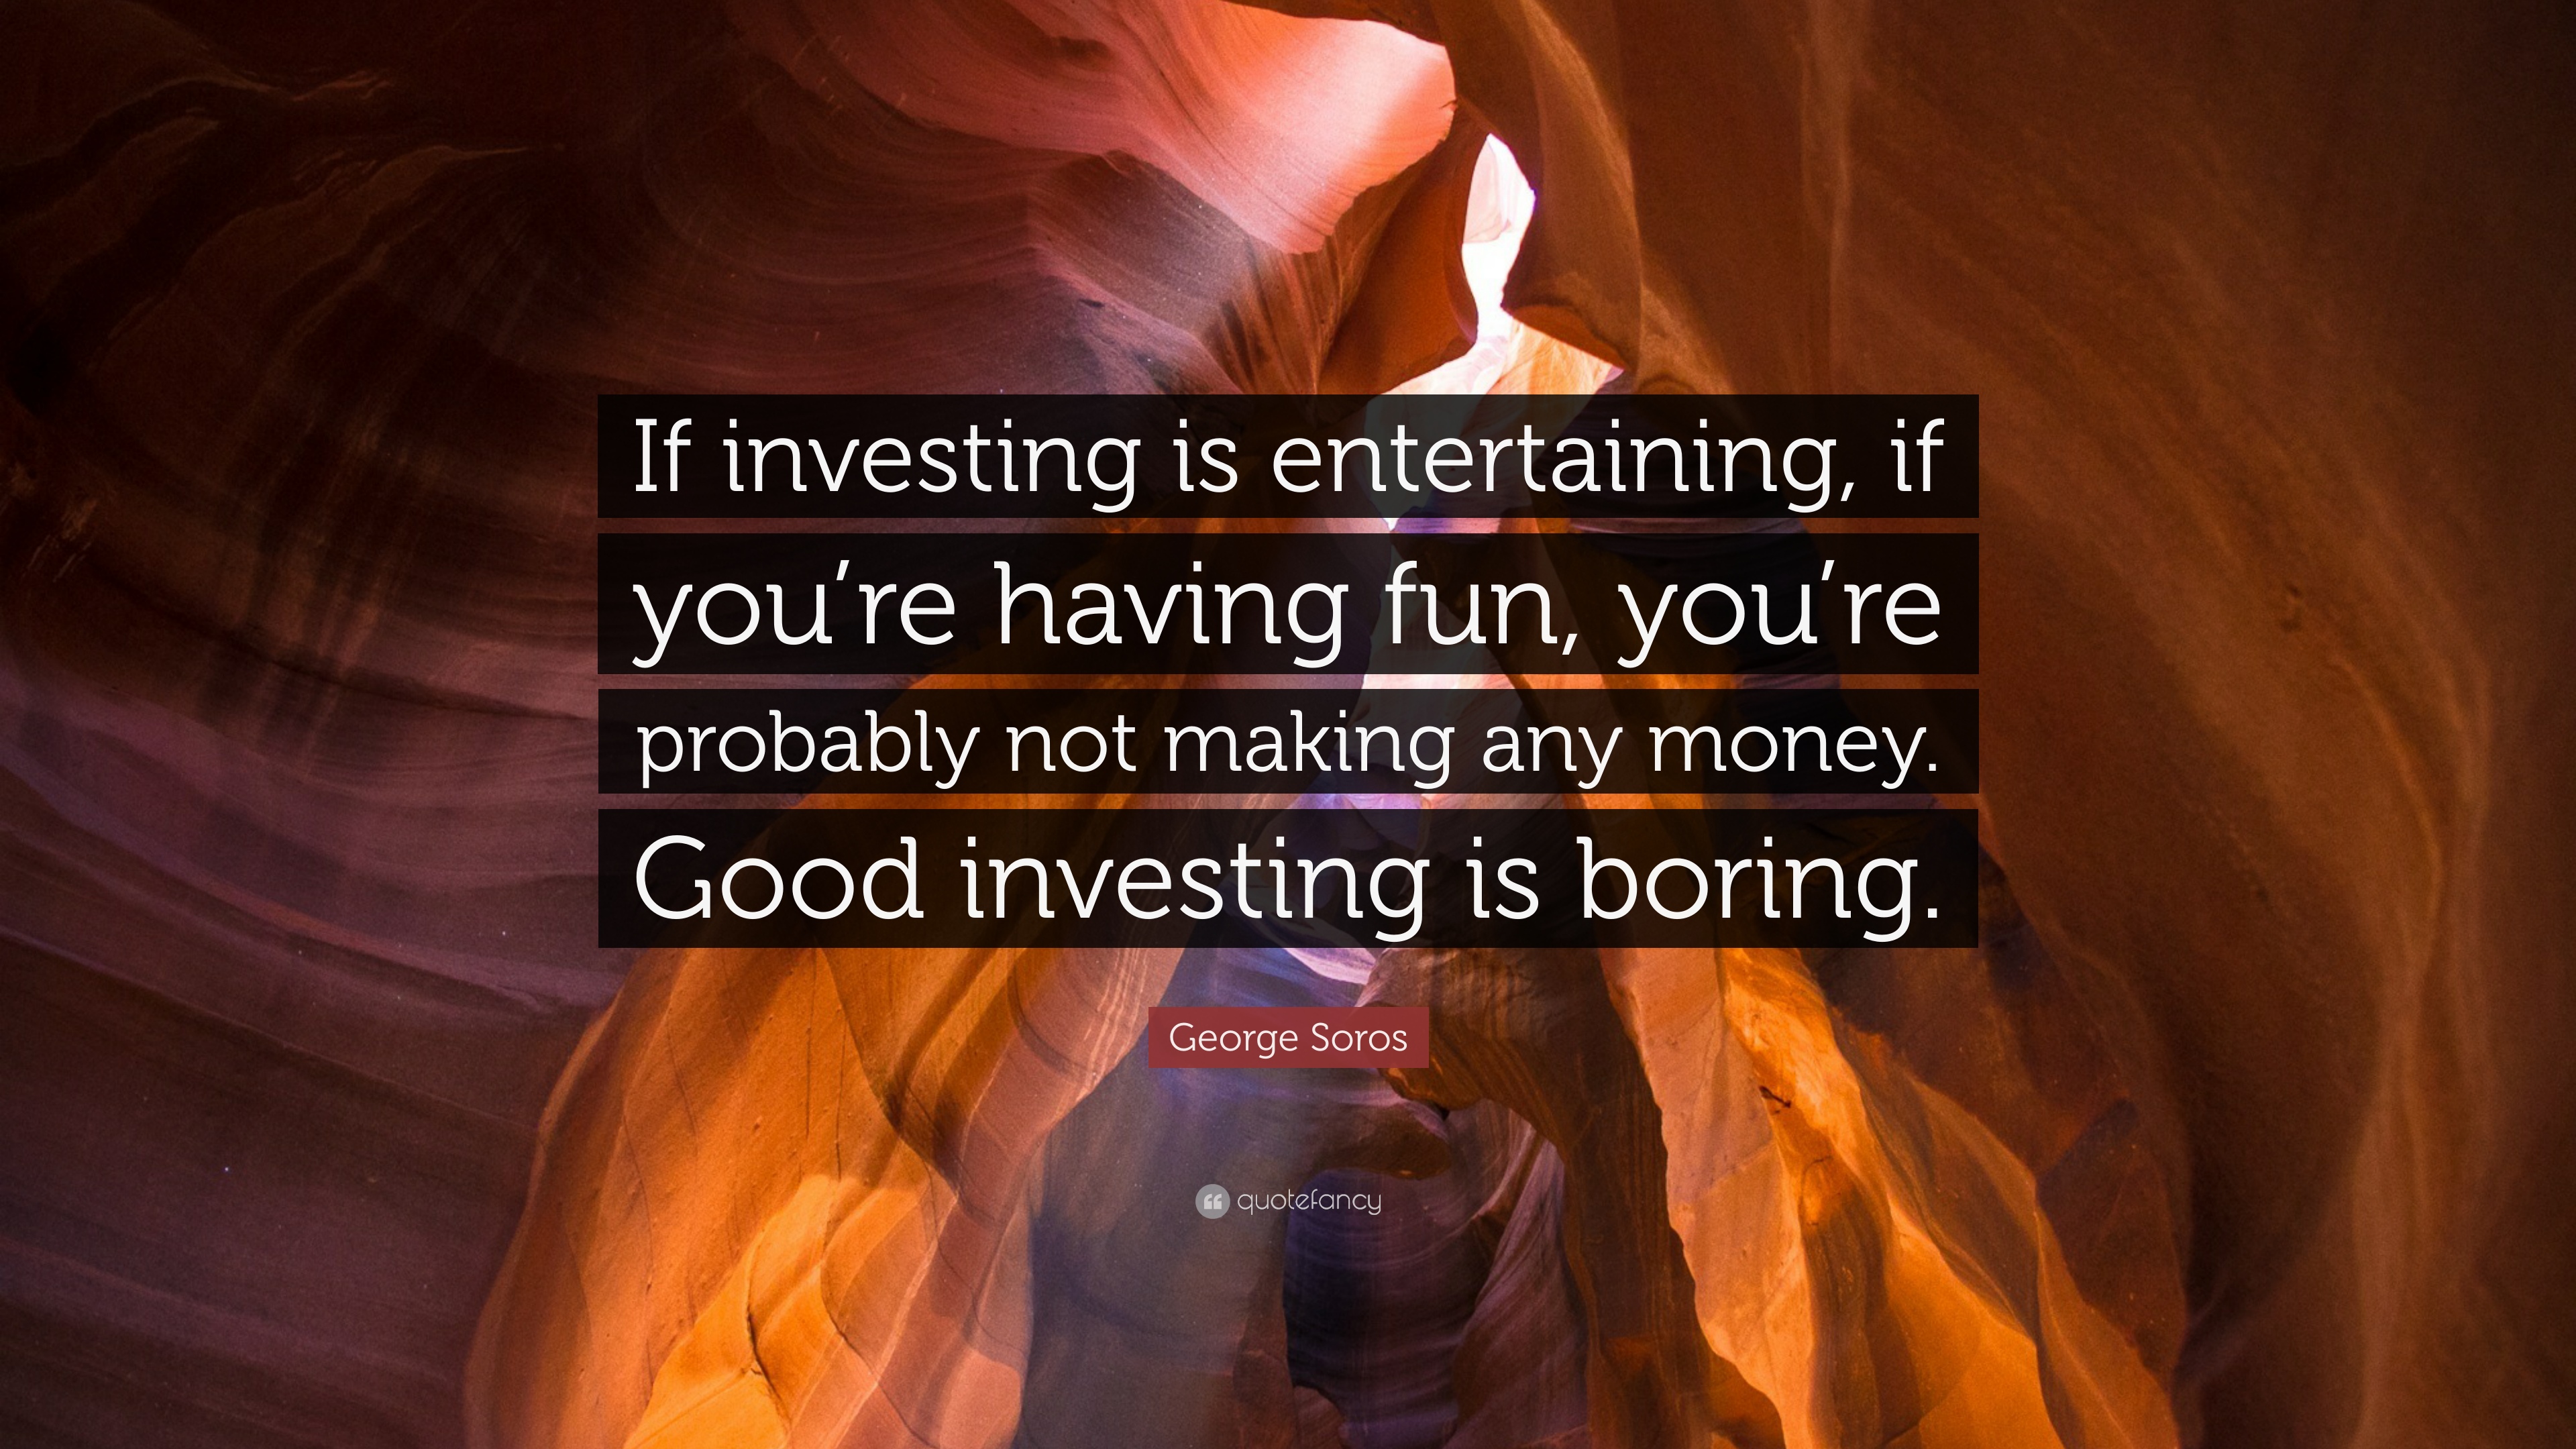 George Soros Quote: “If investing is entertaining, if you're having fun, you're probably not